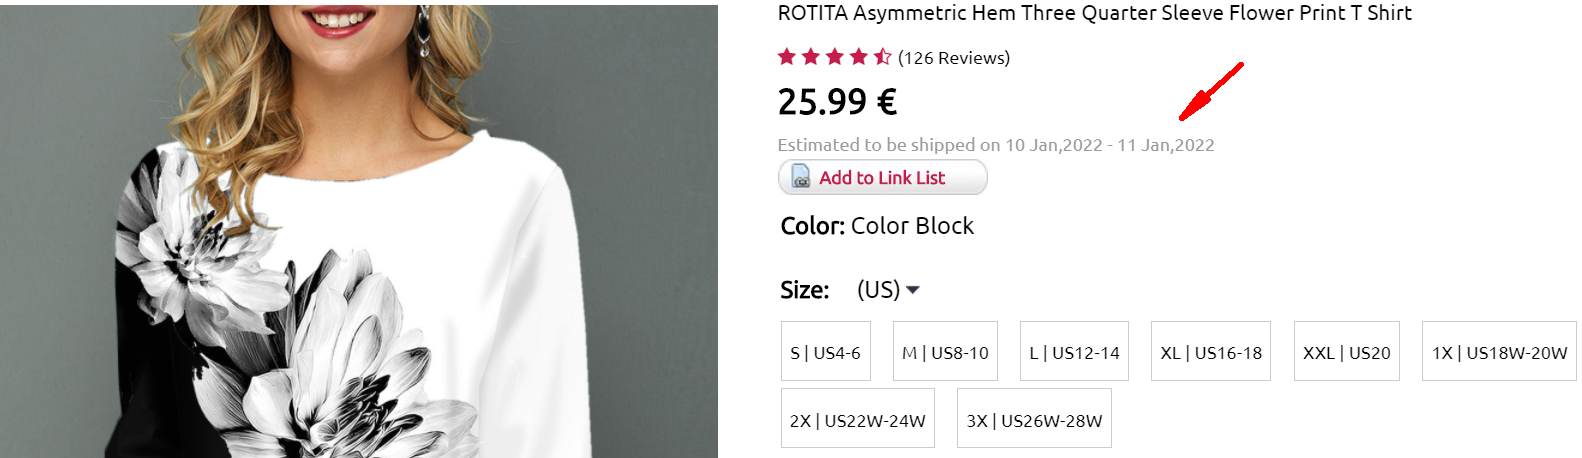 Rotita shipping details on every product pages